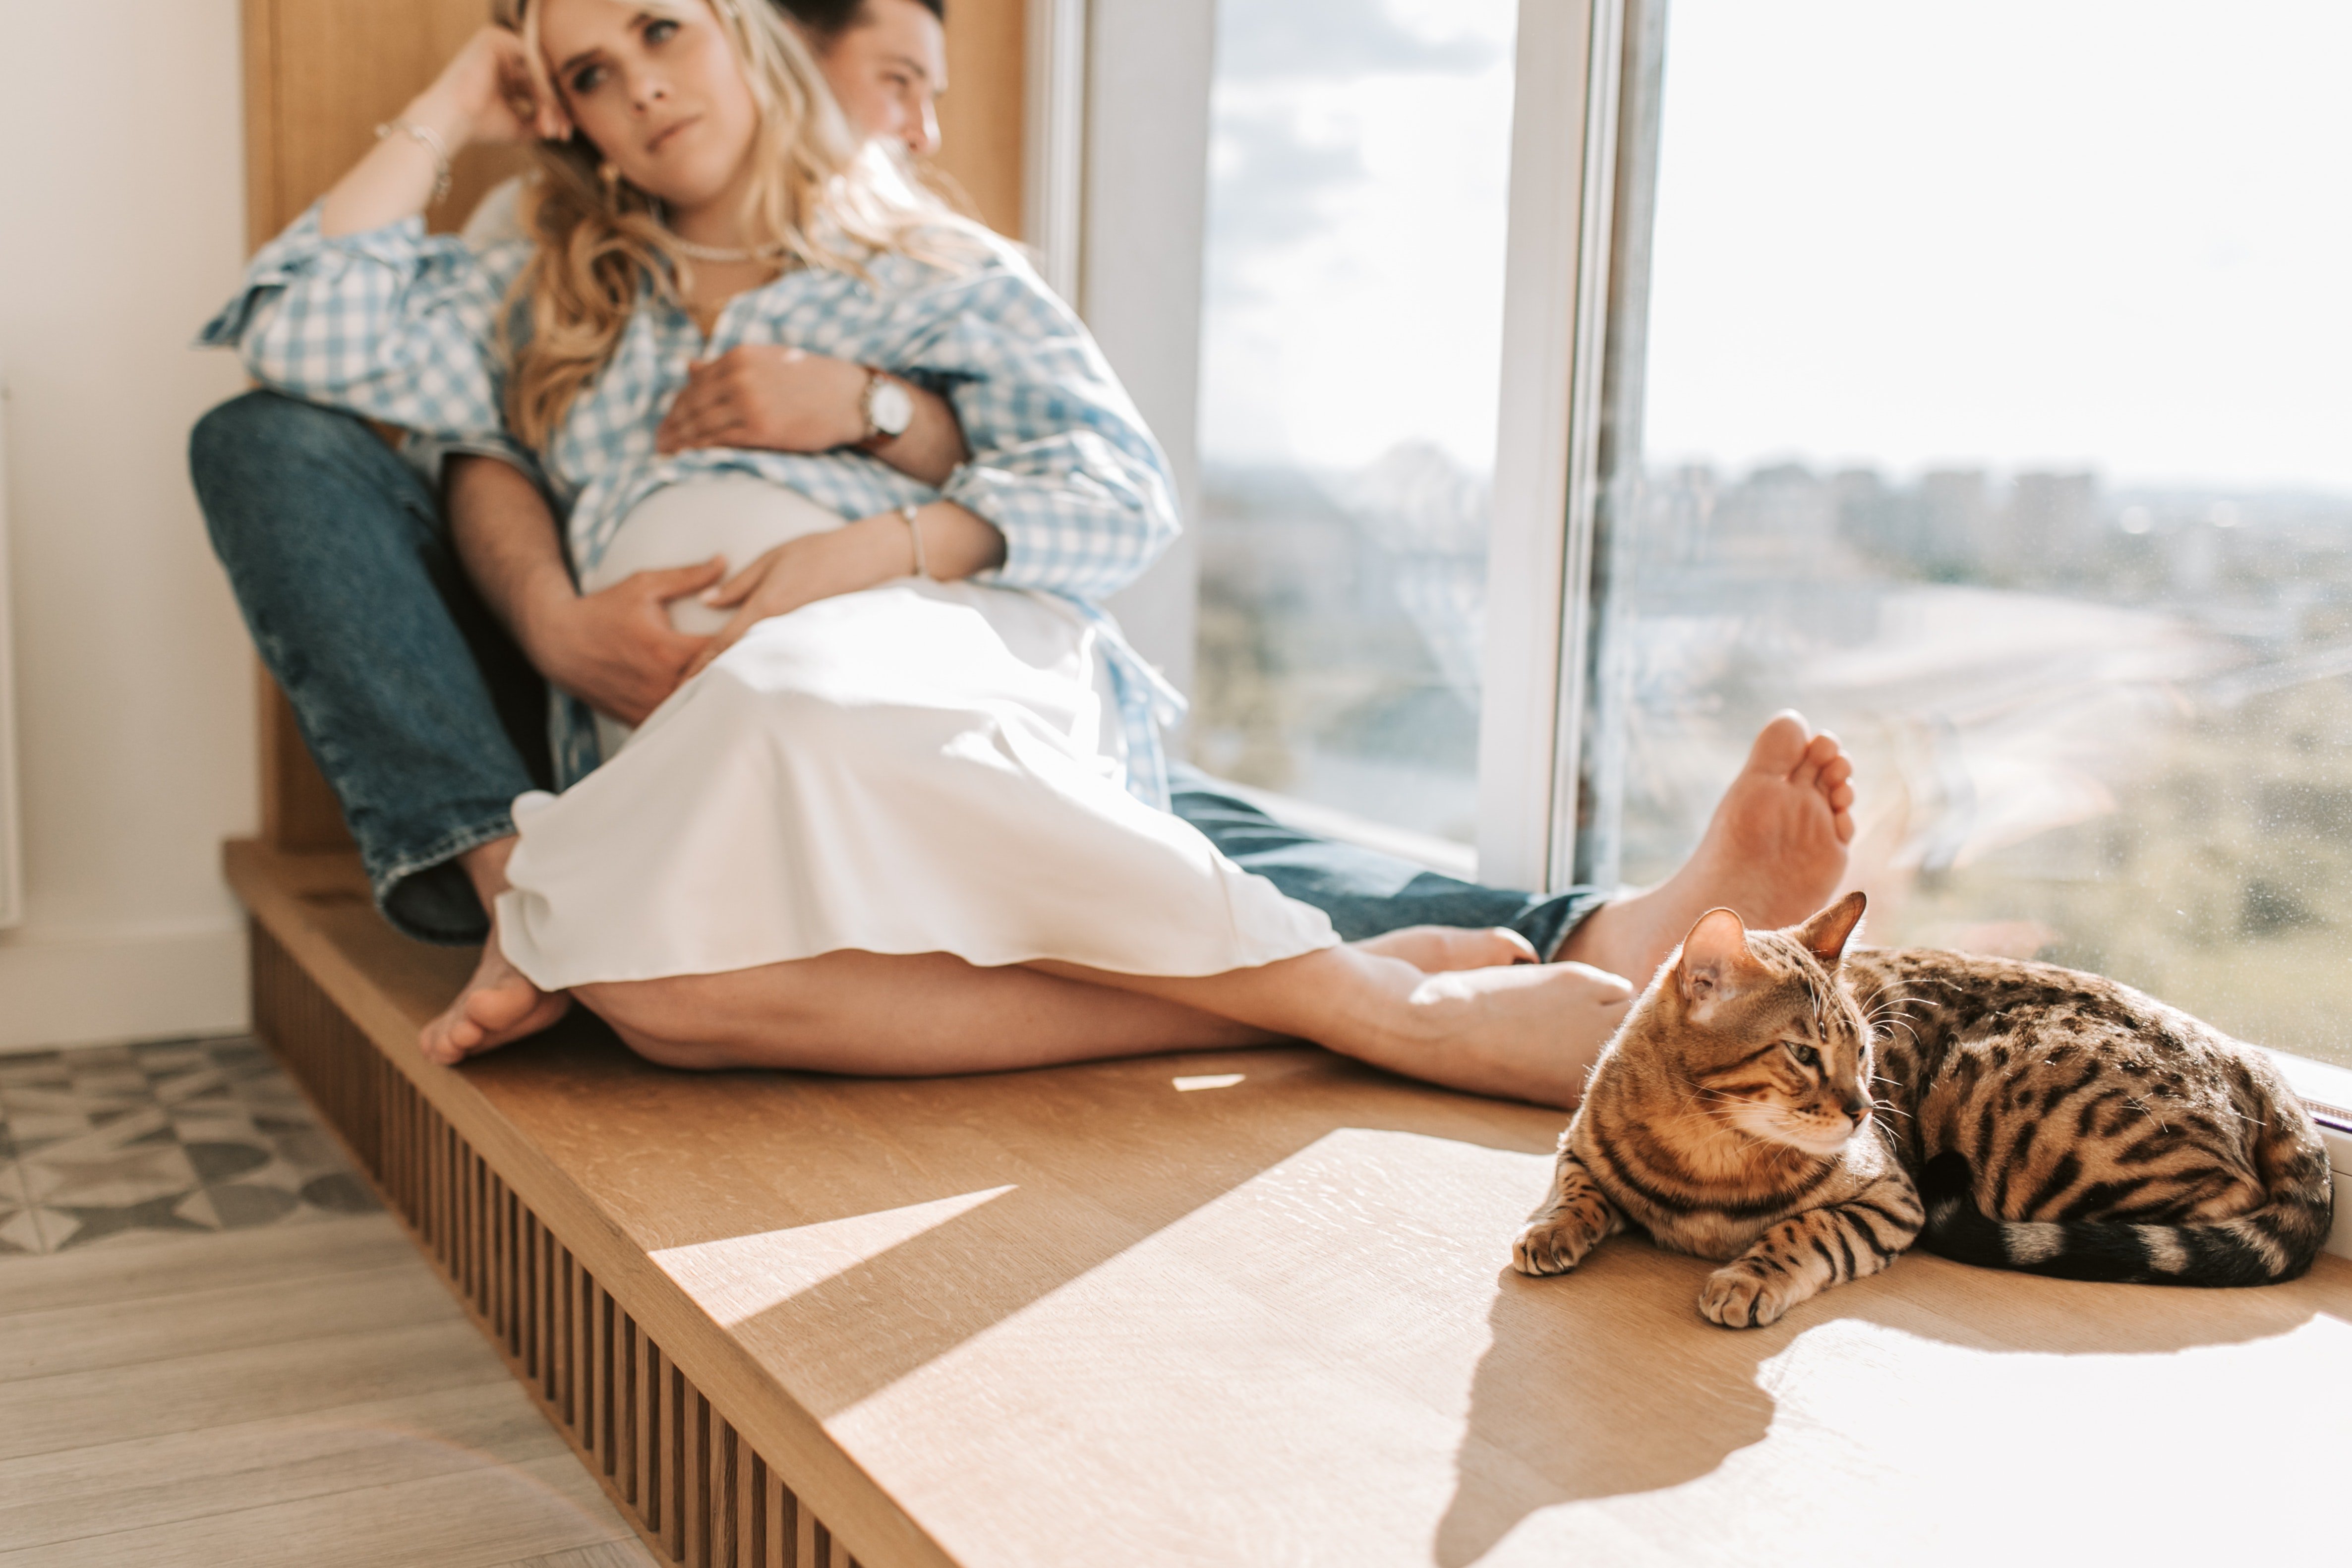 Couple relaxing by the window with their pet cat | Photo: Pexels